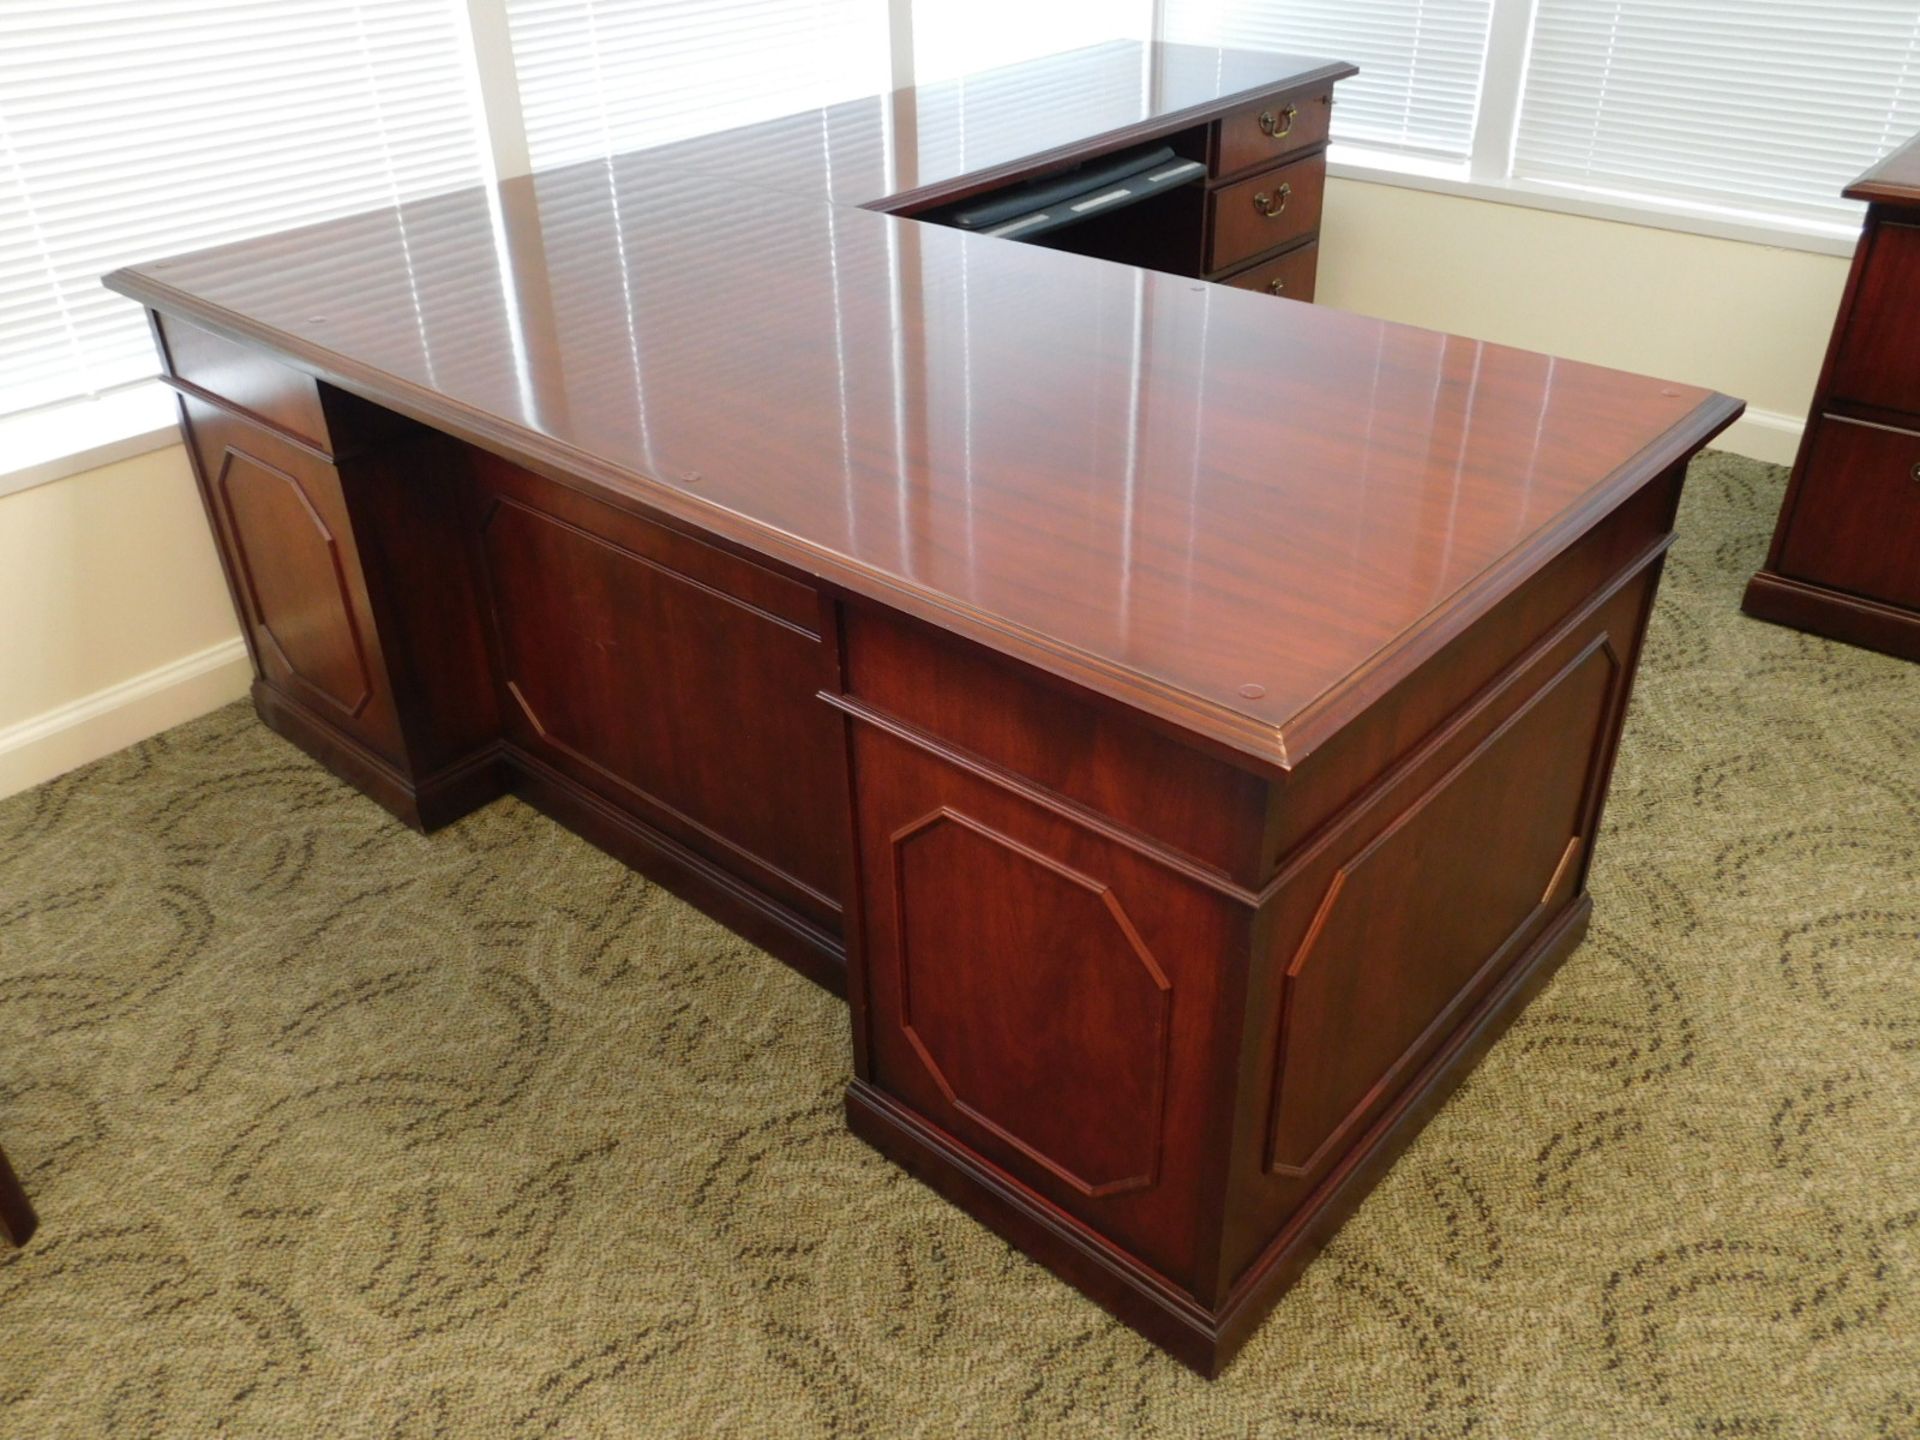 36" X 72" KIMBALL PRESIDENTIAL EXECUTIVE L DESK W/ RIGHT EXTENSION